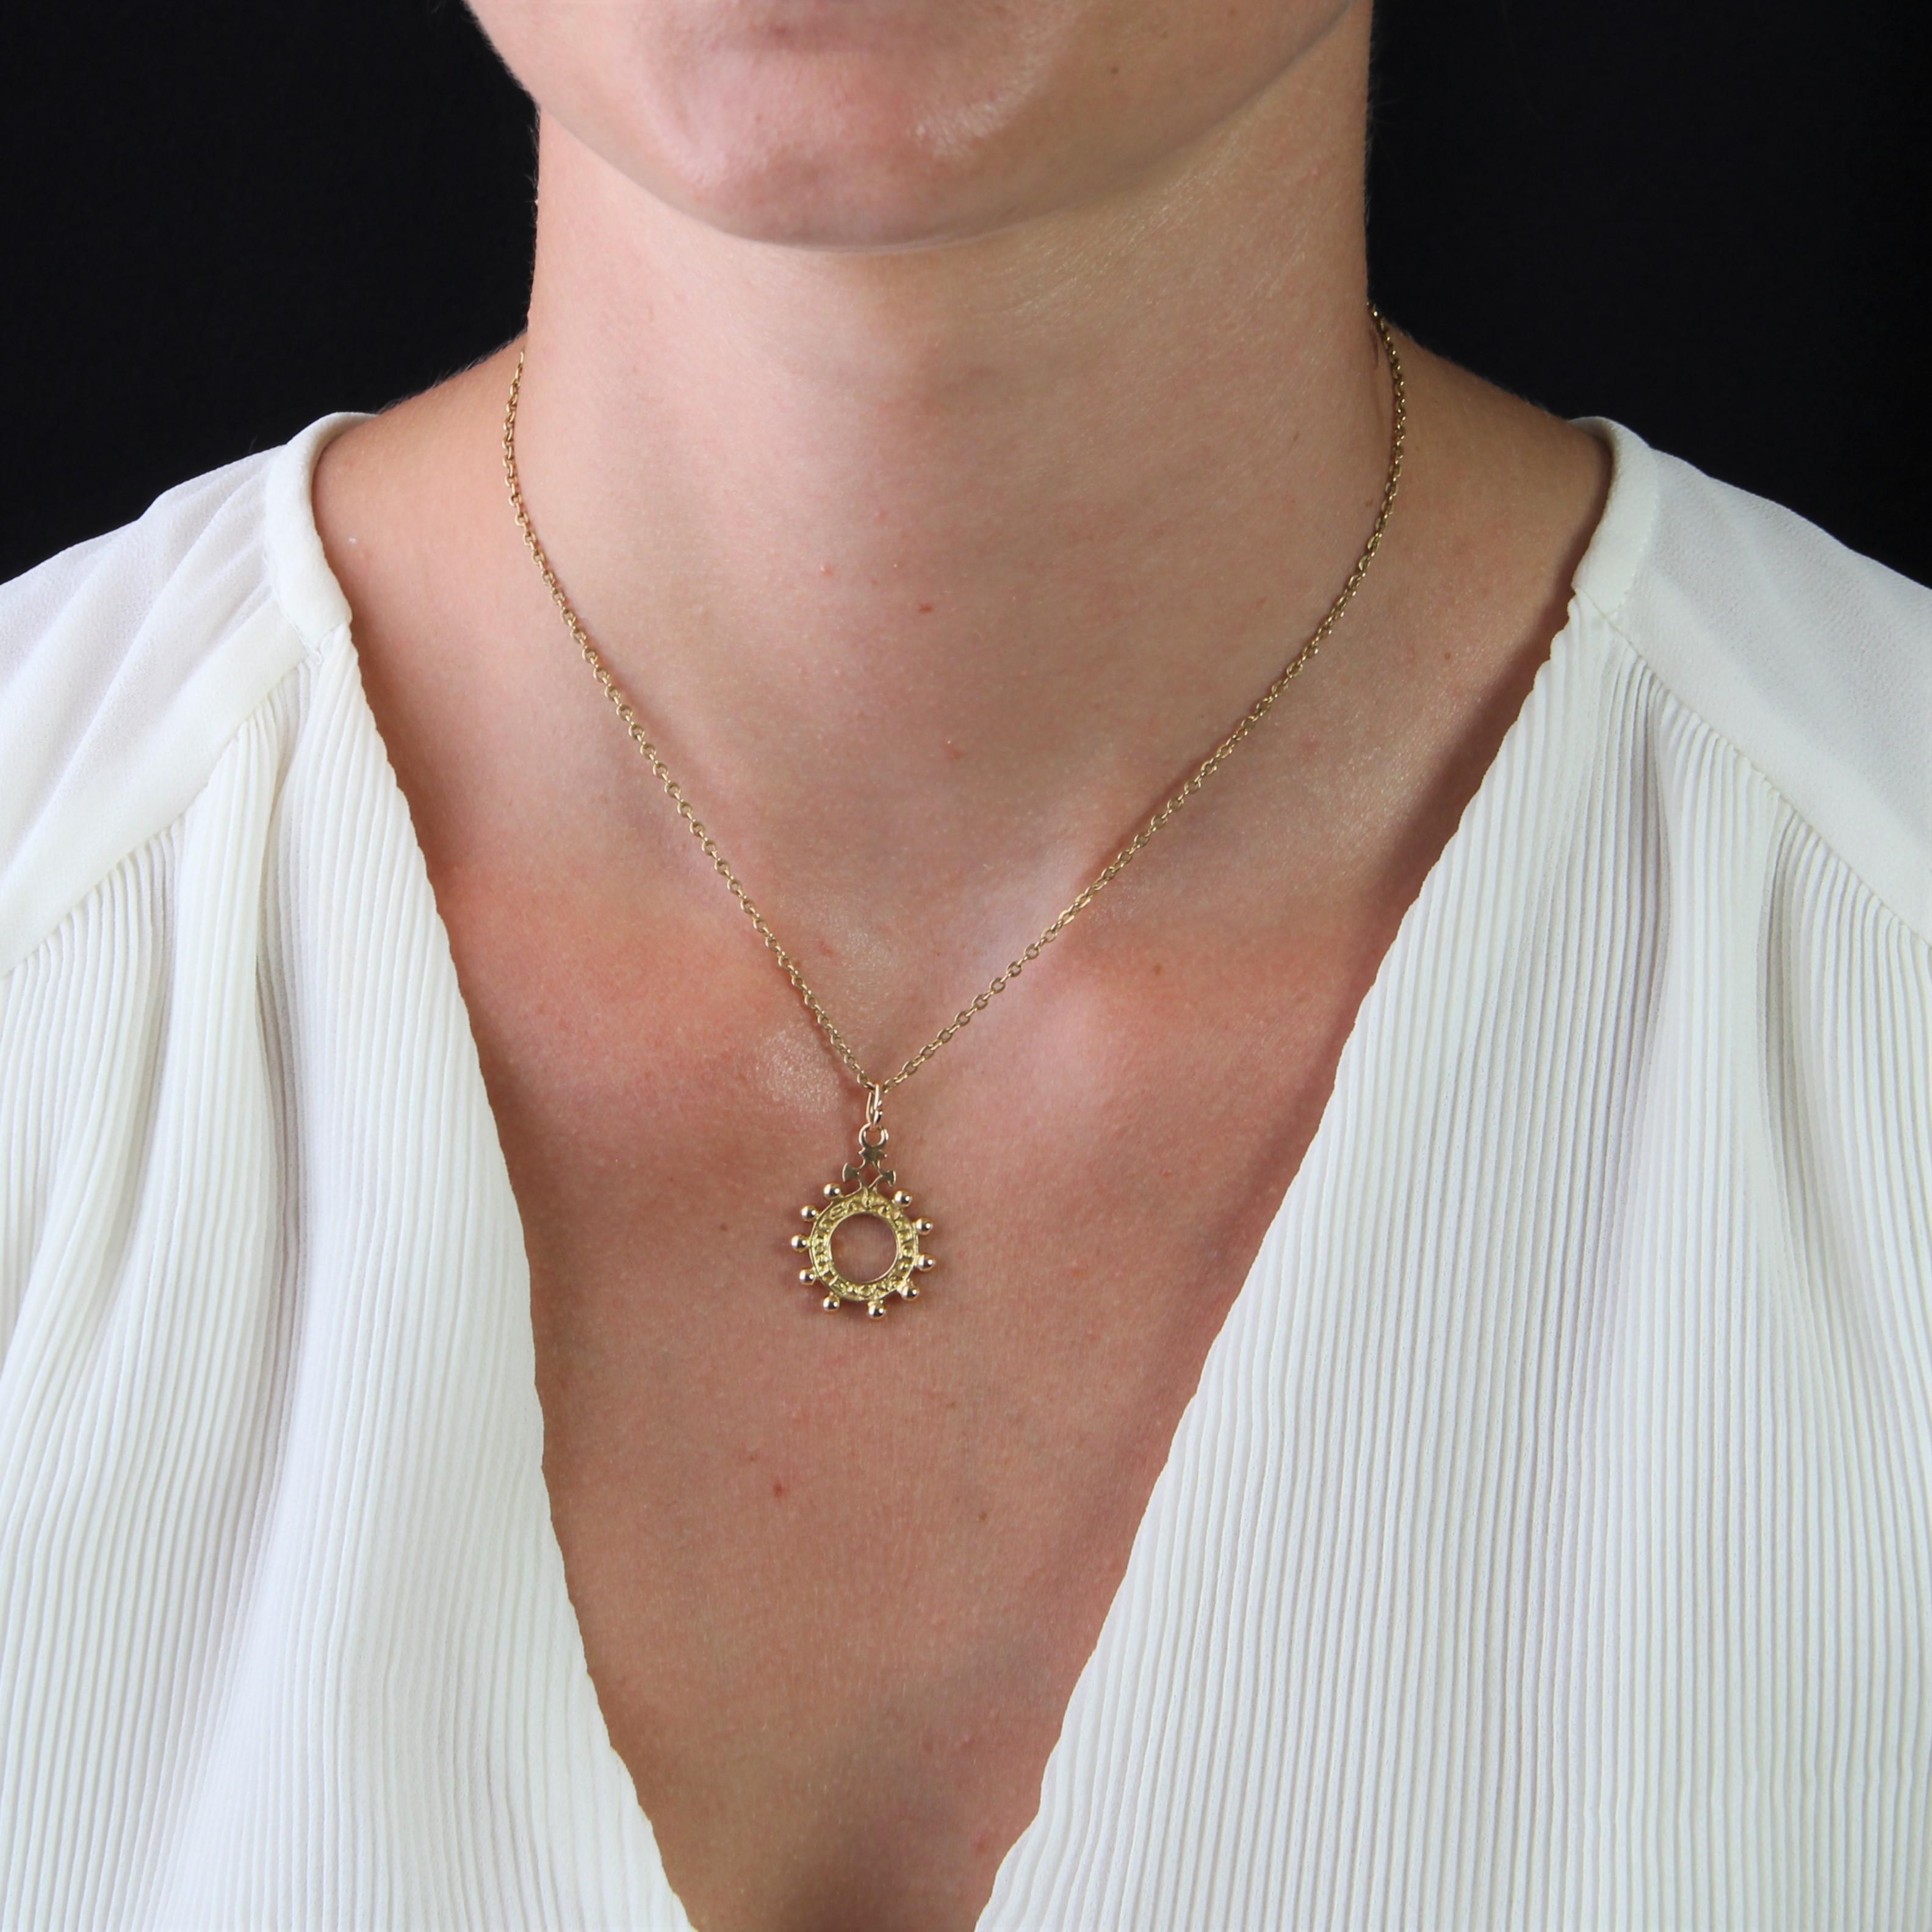 Pendant in 18 karat rose gold.
A Basque dizainier pendant, it forms an openwork circle adorned with 10 gold beads and the words 